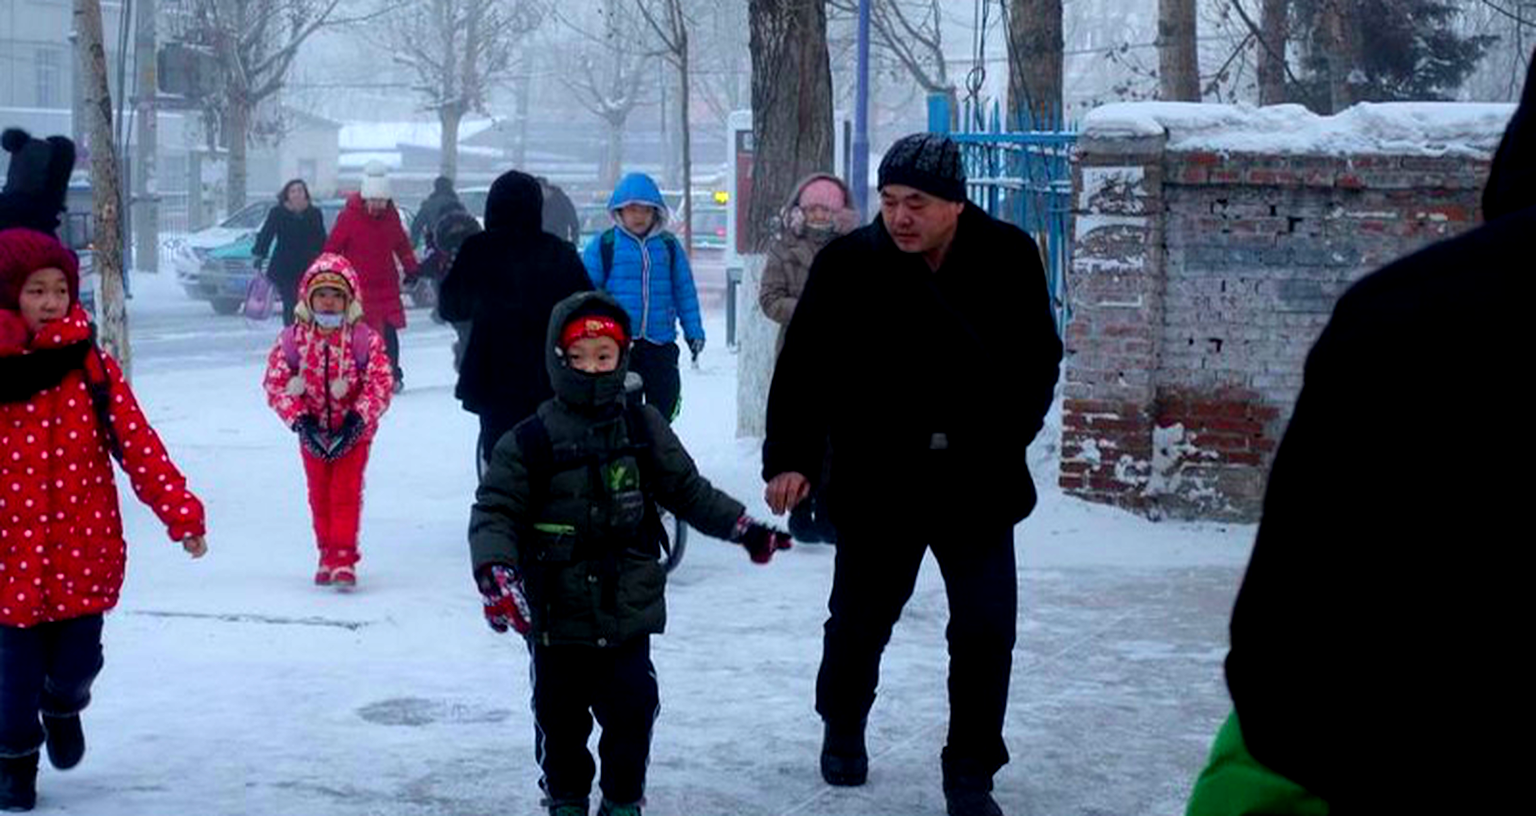 American Kids Stay Home When It Snows While China Keeps Schools Open at -50 Degrees Fahrenheit